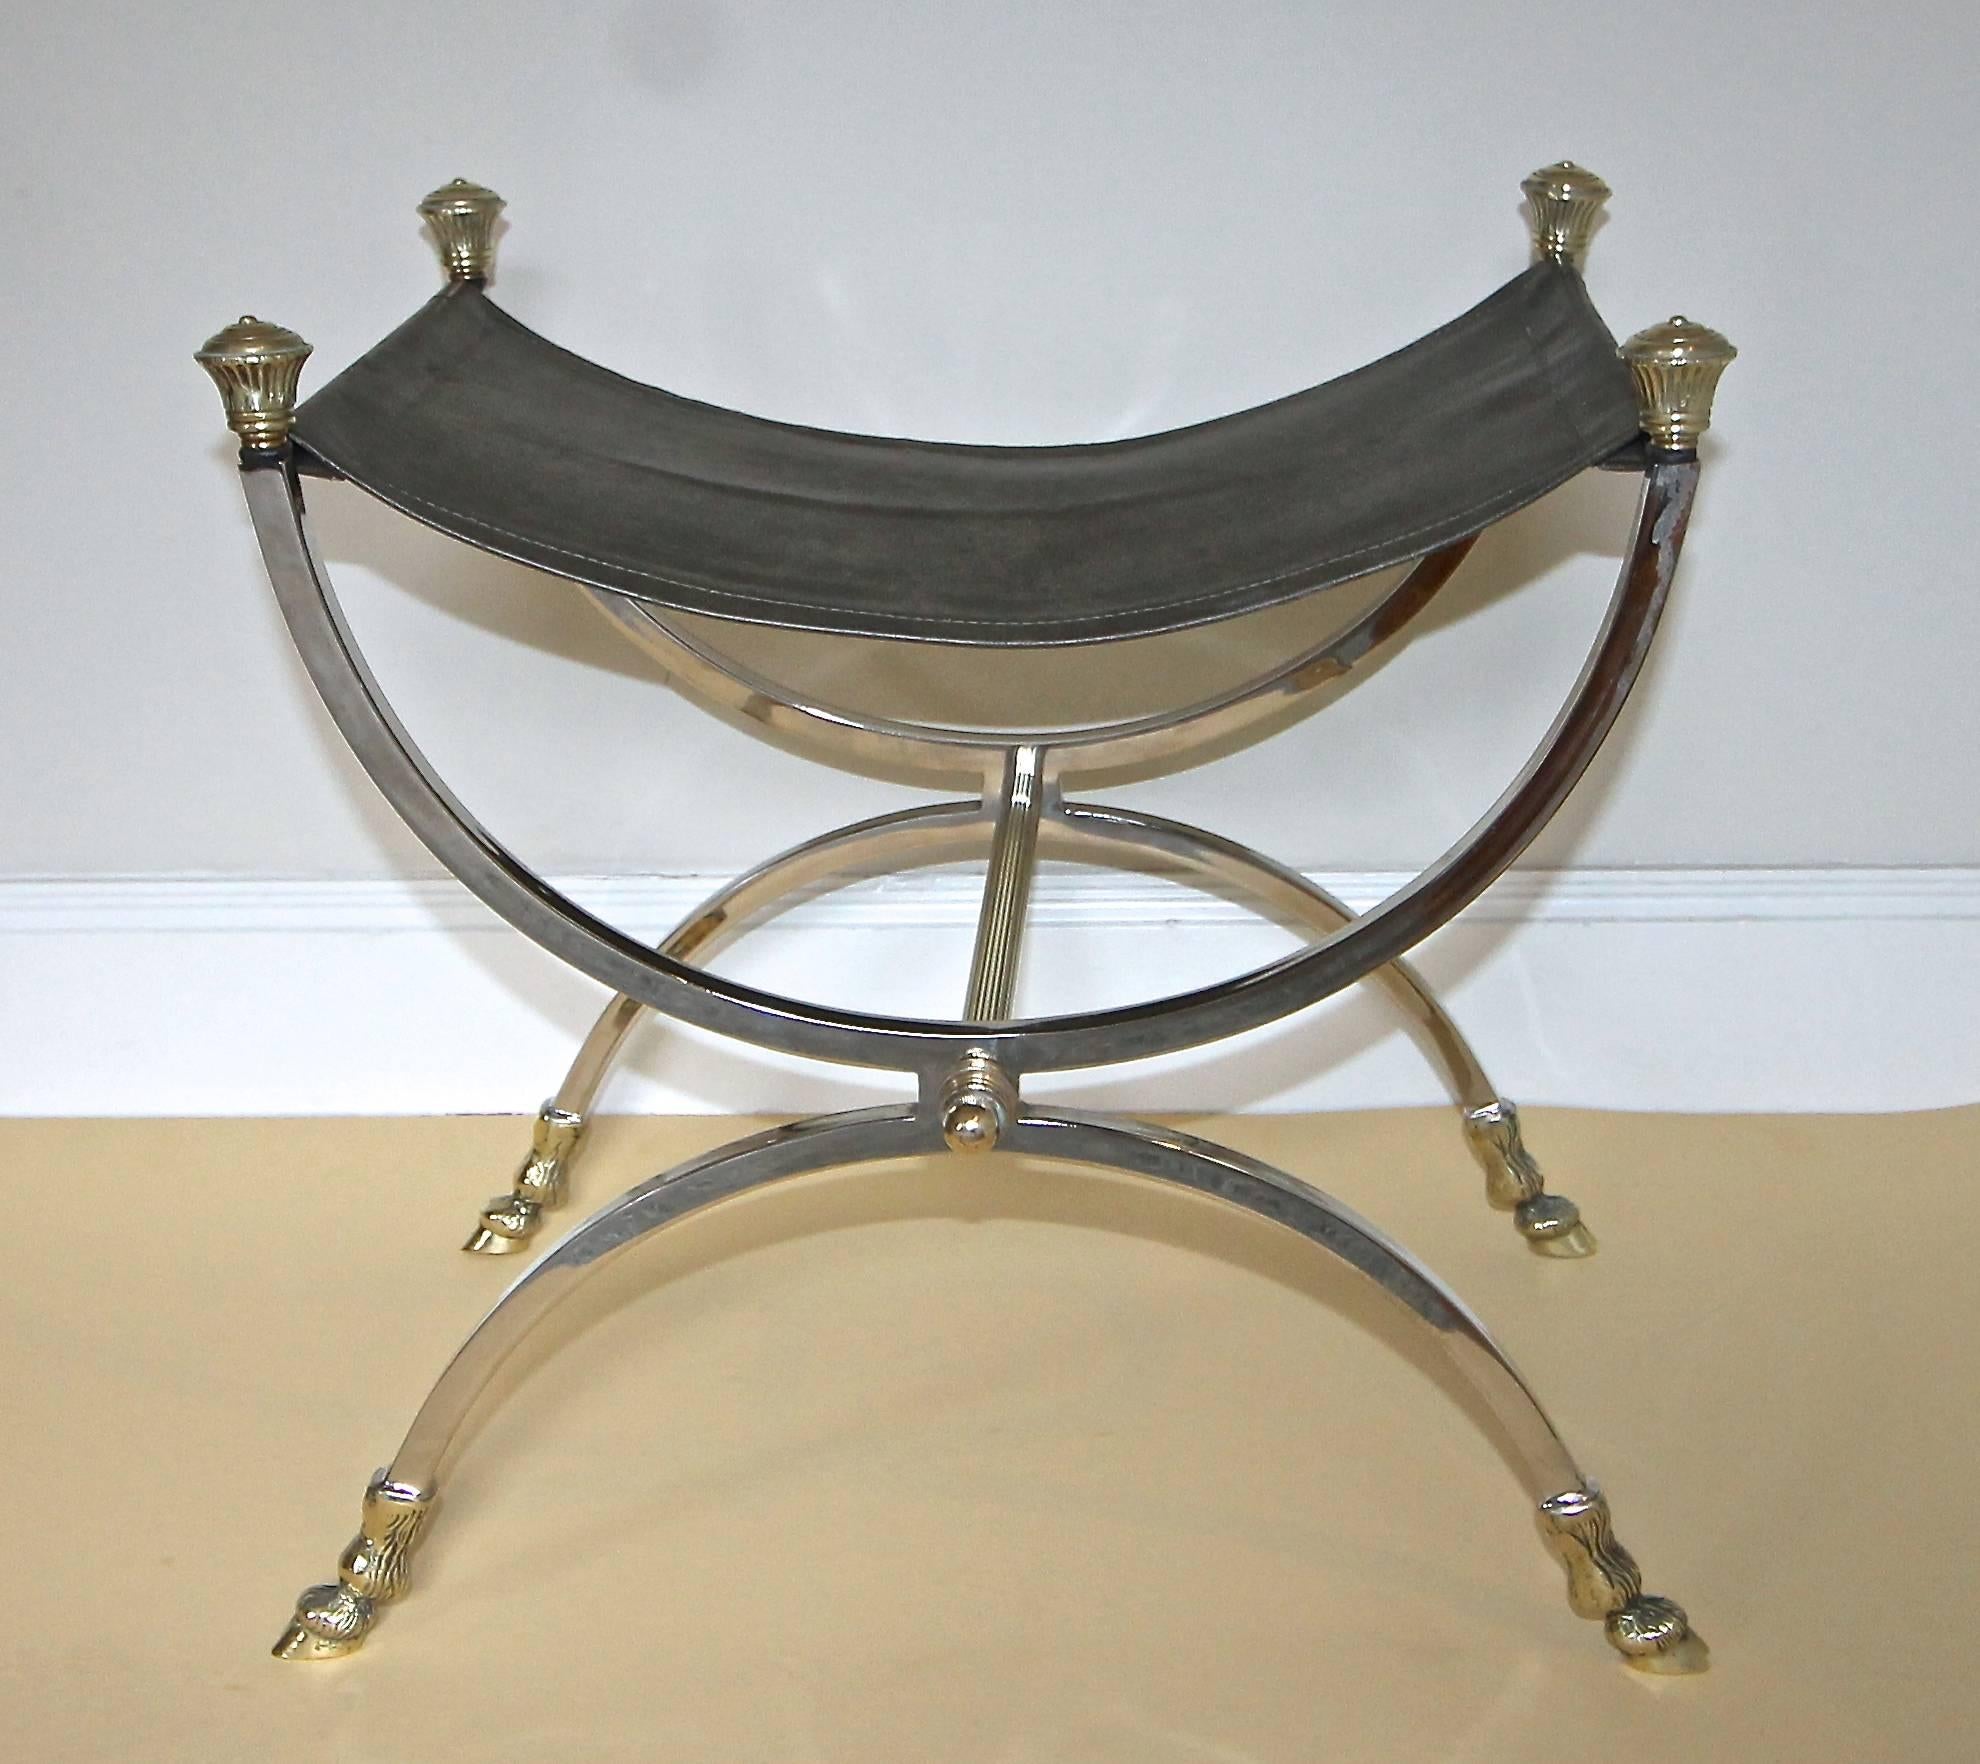 French directoire style nickelled steel and brass bench or stool with green leather seat. Nice detail including hoof feet legs and heavy thick cast brass finials.